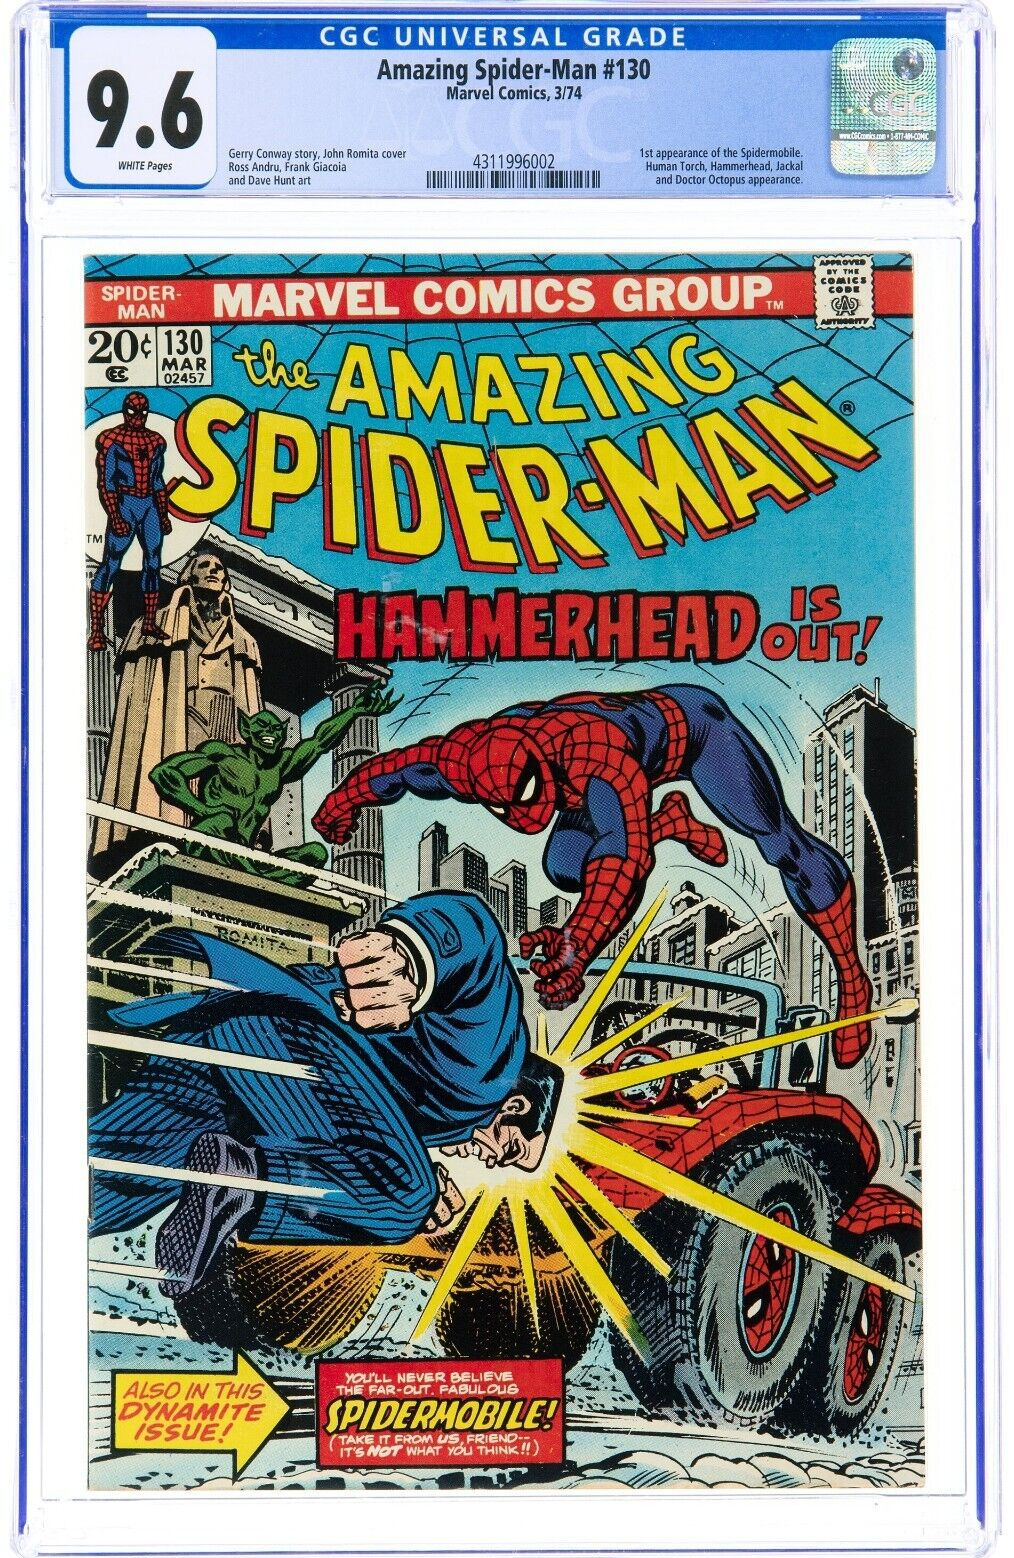 🔥1974 Amazing Spider-Man #130 CGC 9.6 WHITE Pgs 1st Appearance of Spidermobile.